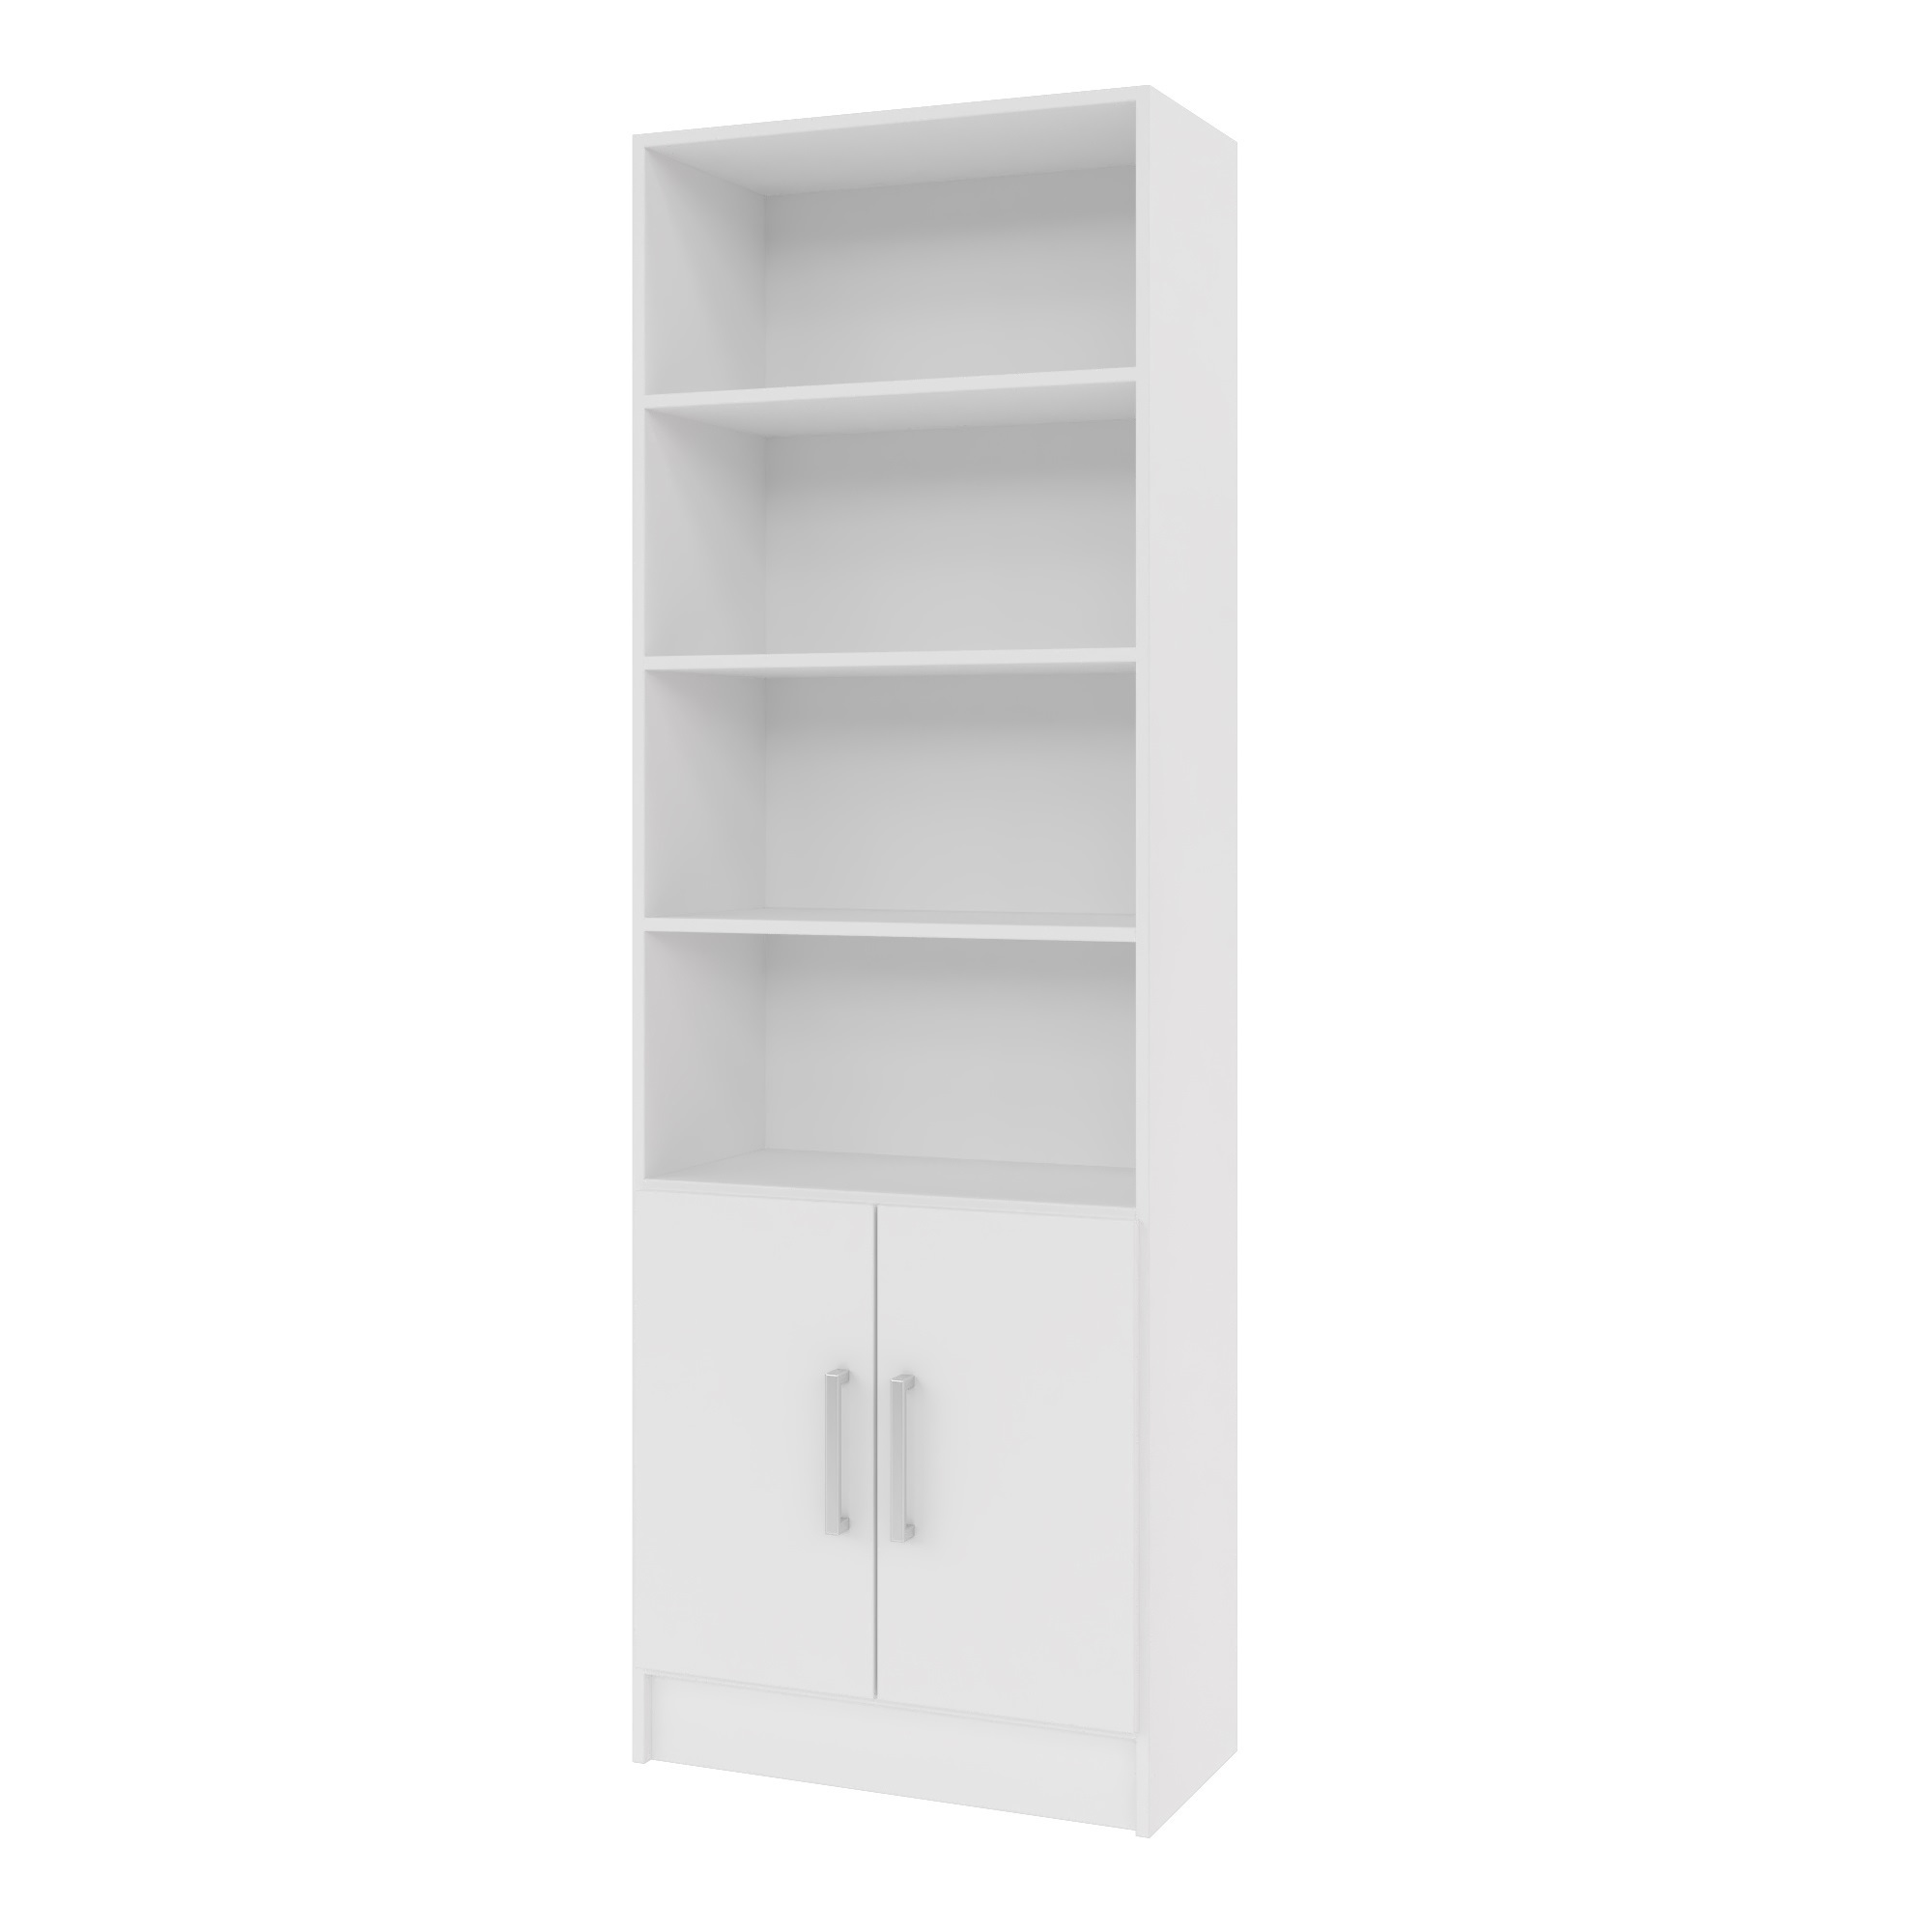 Manhattan Comfort, Catarina Cabinet with 5 shelves in White, Width 24.41 in, Height 71.85 in, Depth 12.2 in, Model 29AMC